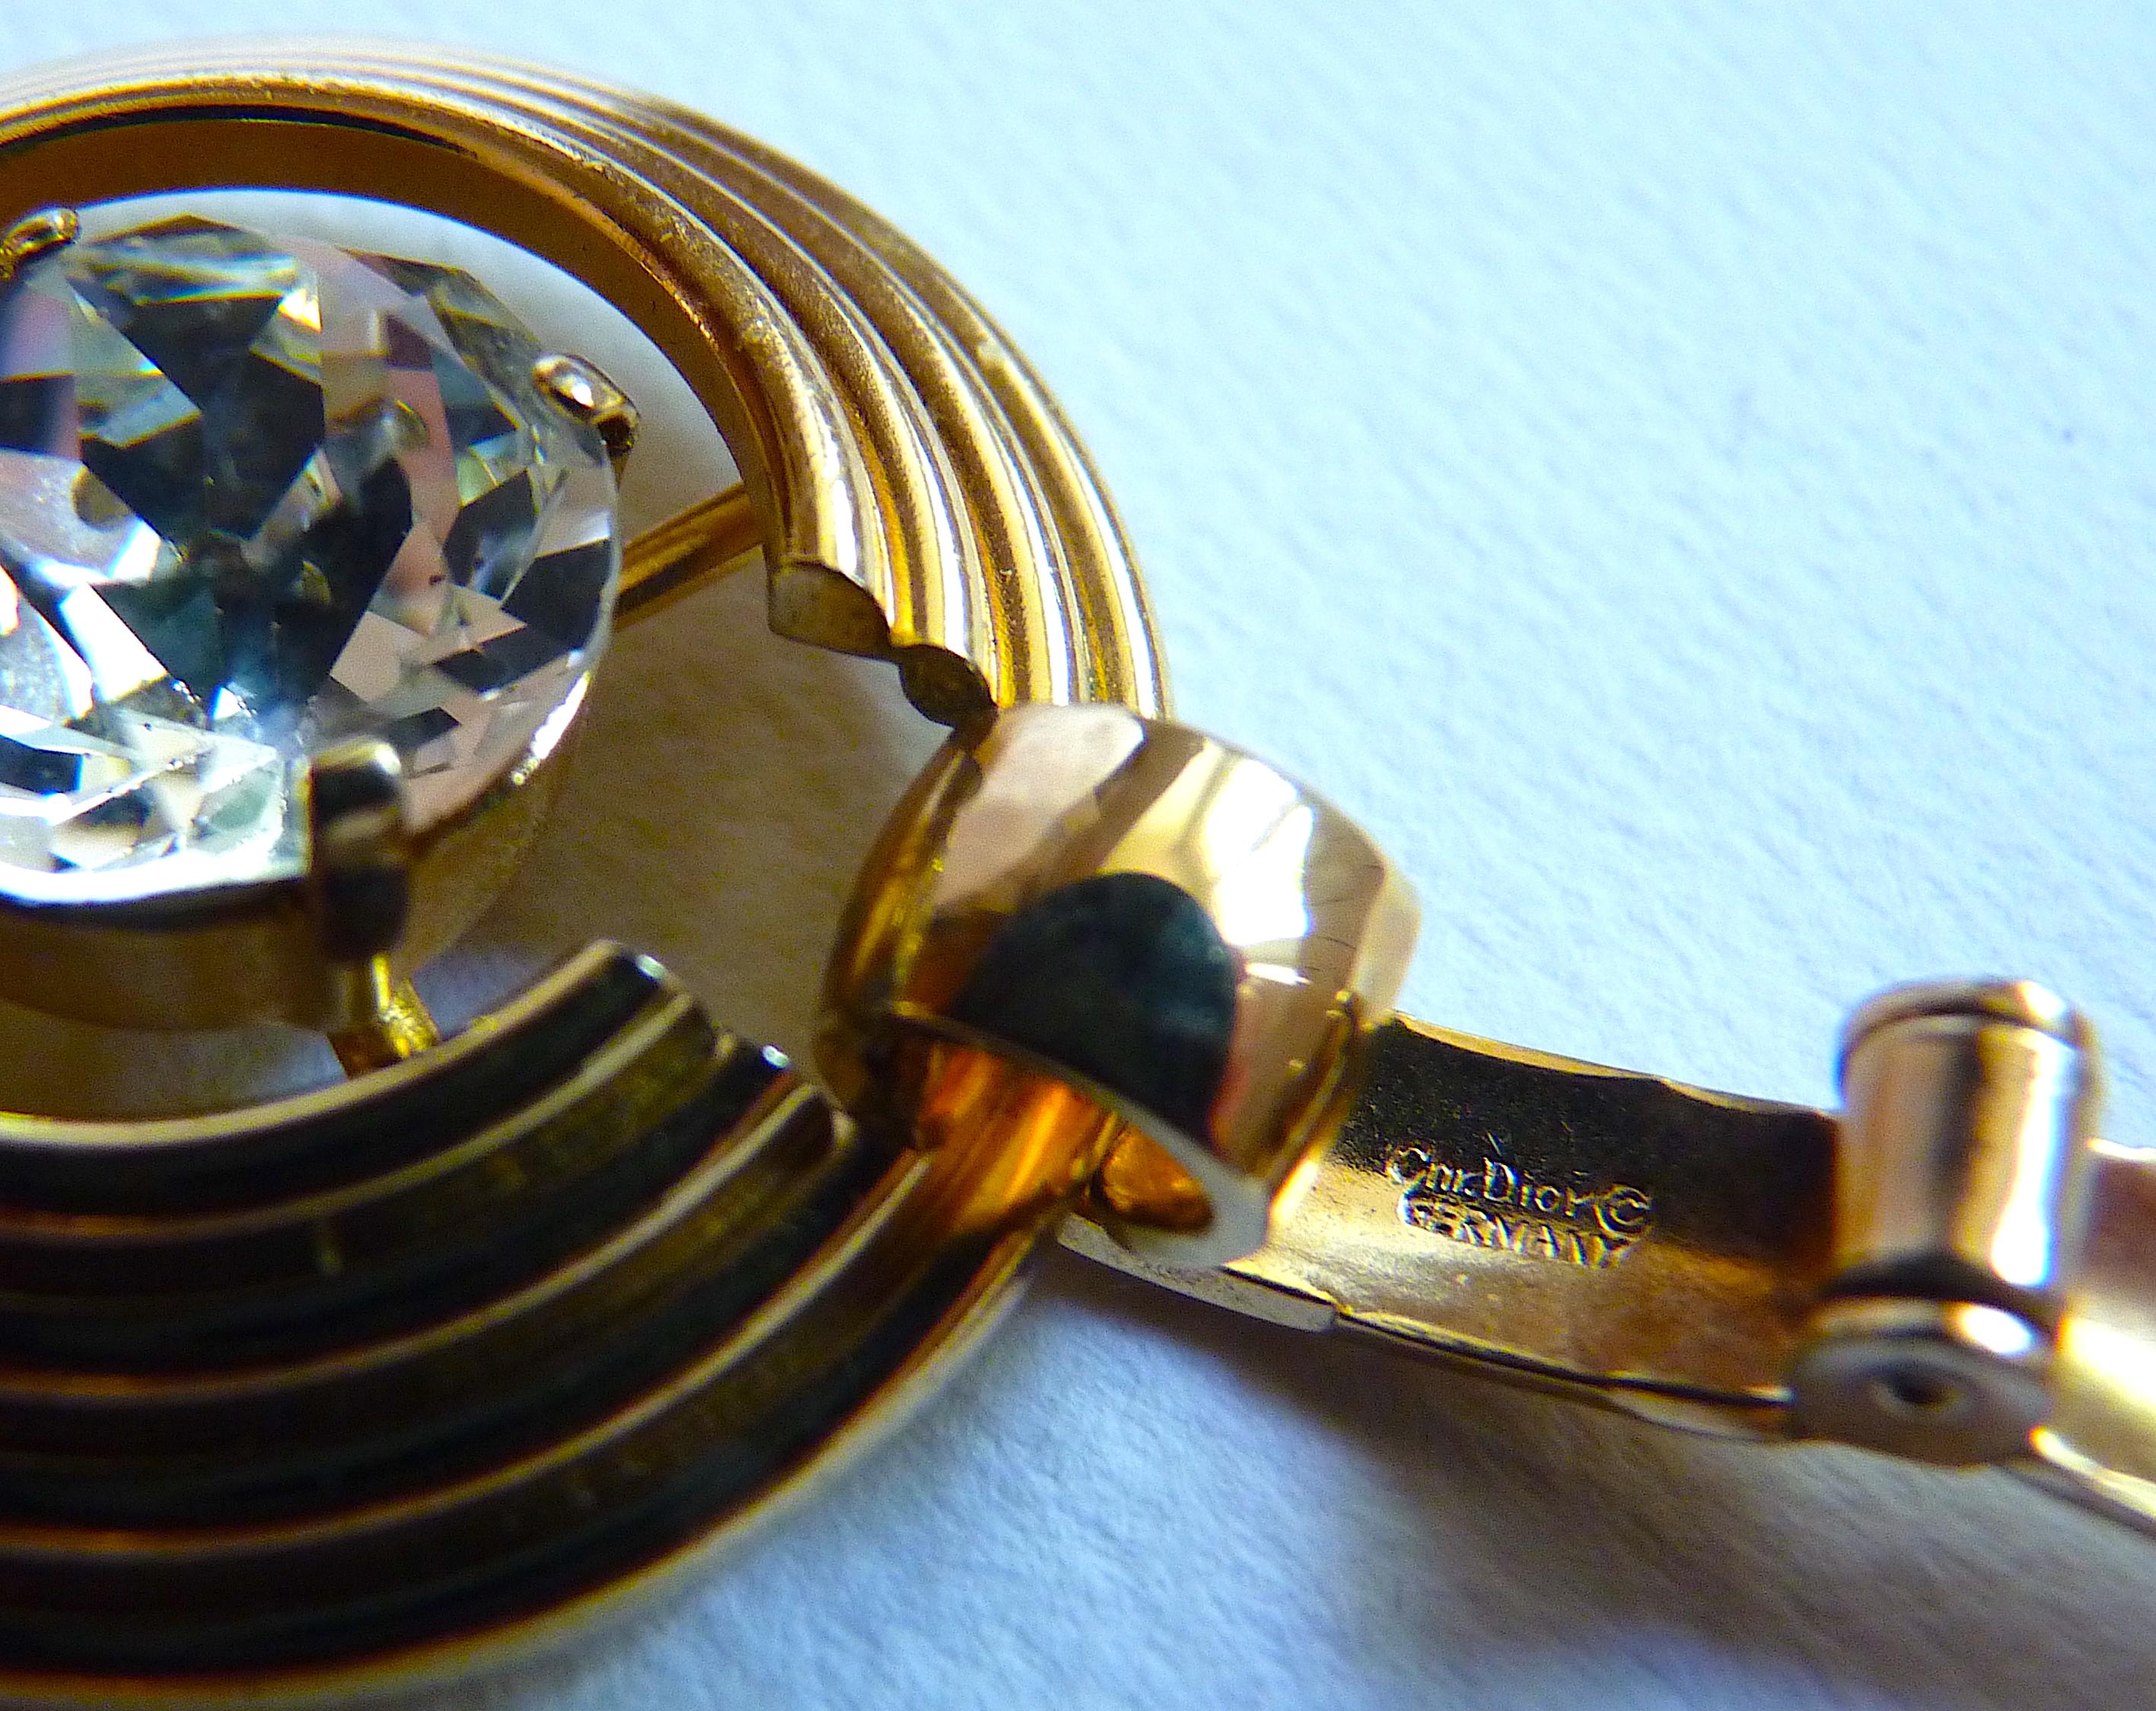 Dior Clear Crystal Cabochons and Gilt Metal Bracelet, Vintage from the 1970s For Sale 1